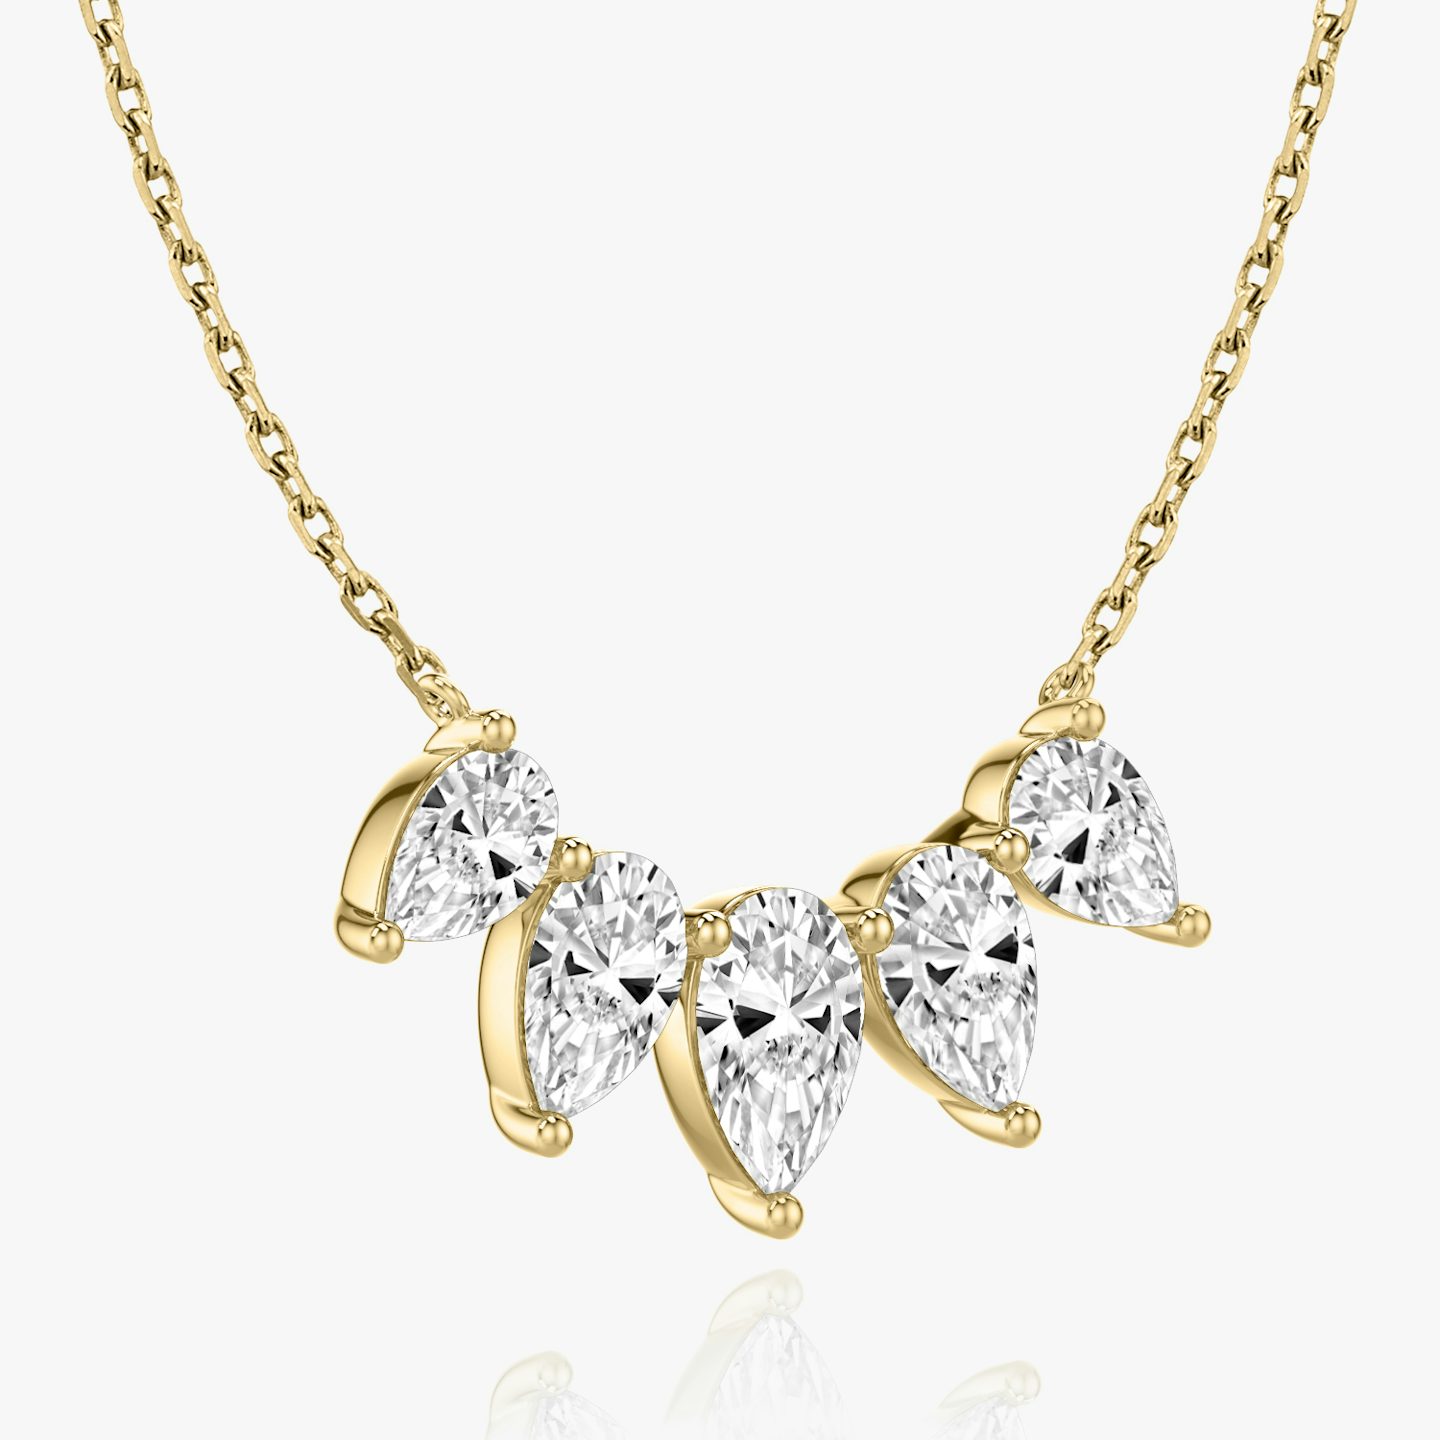 Arc Necklace | Pear | 14k | 18k Yellow Gold | Chain length: 16-18 | Diamond size: Large | Diamond count: 5